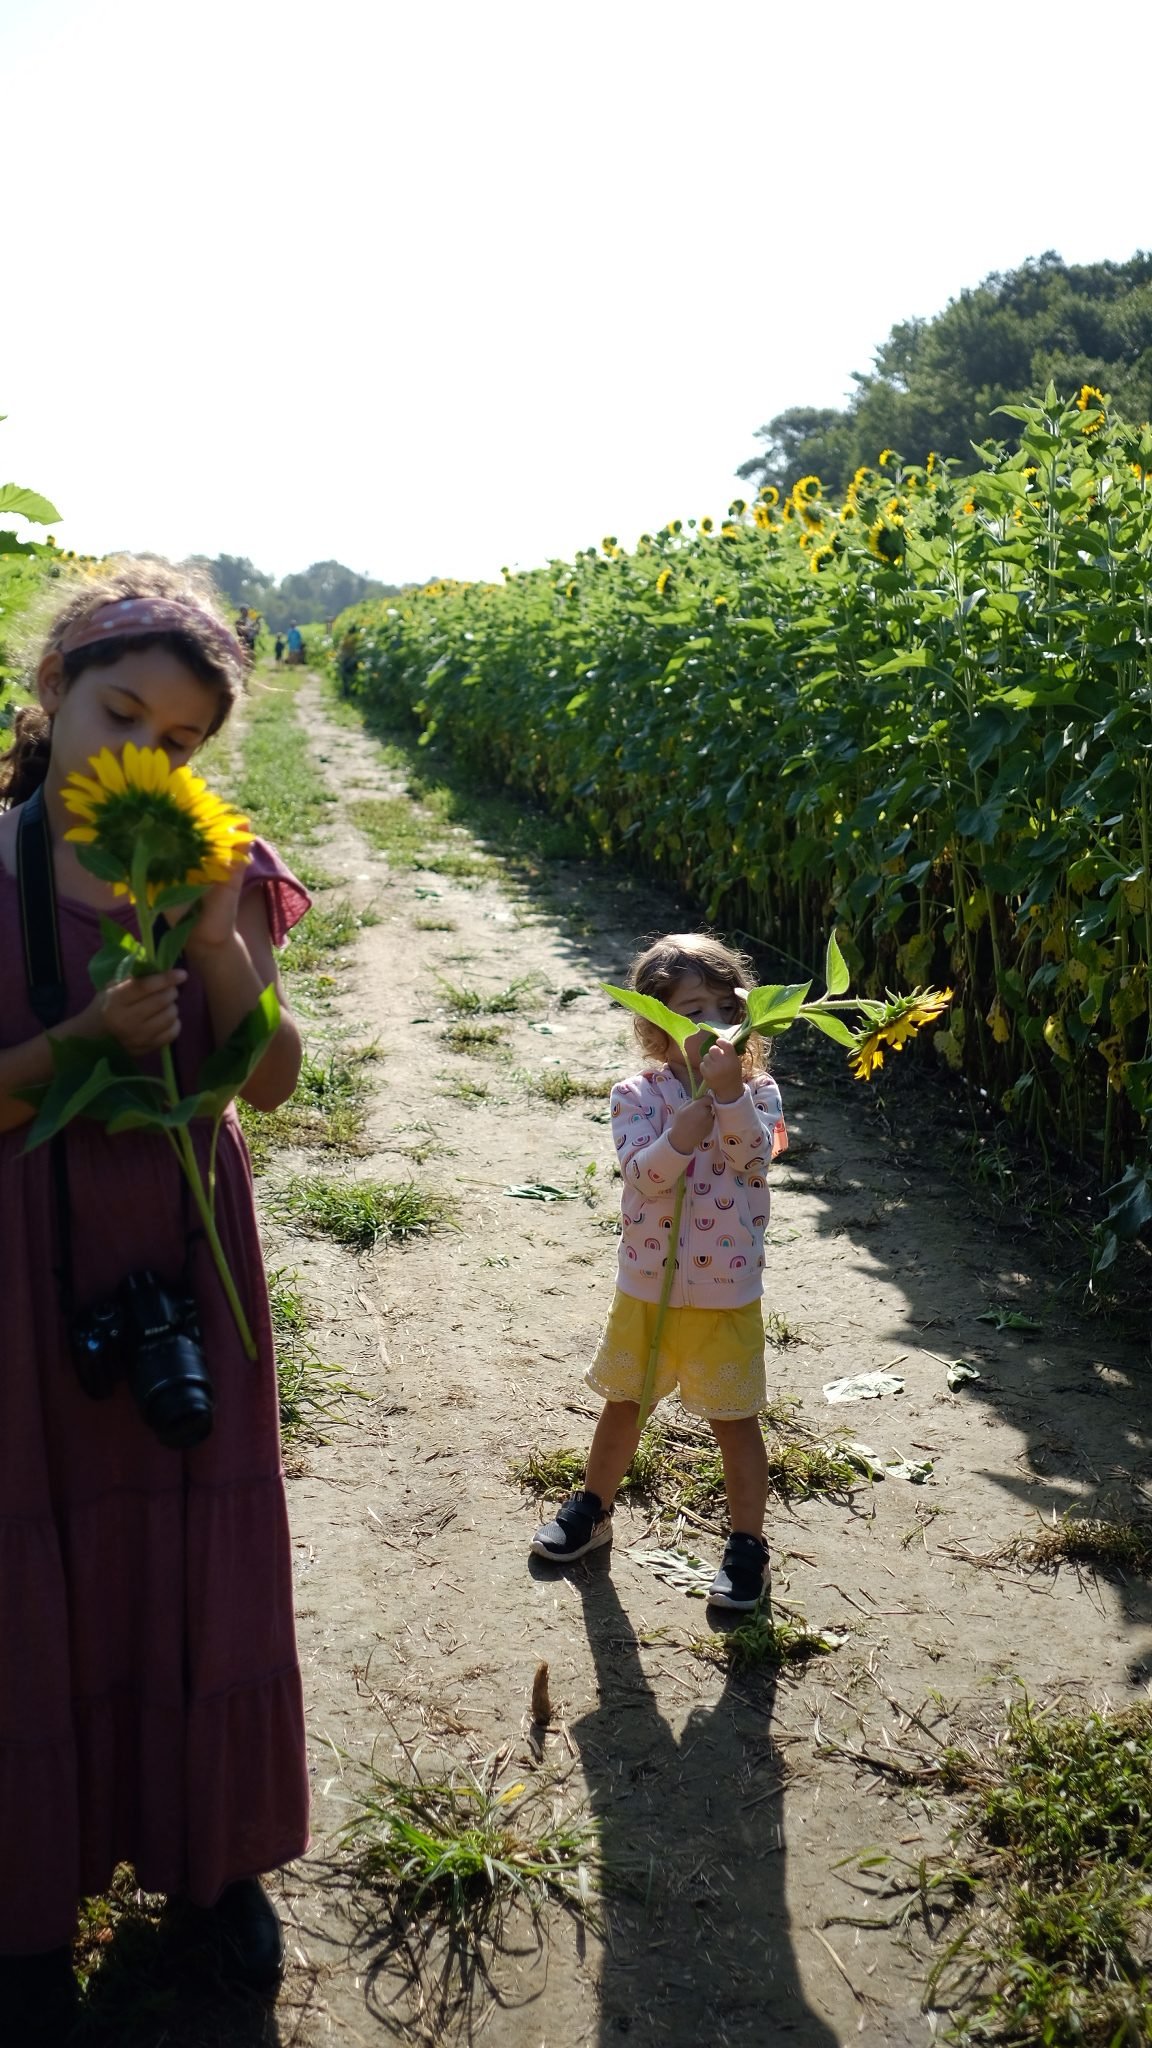 Lifestyle Blogger Chocolate & Lace shares her trip to Sunflower Fields near Philadelphia.